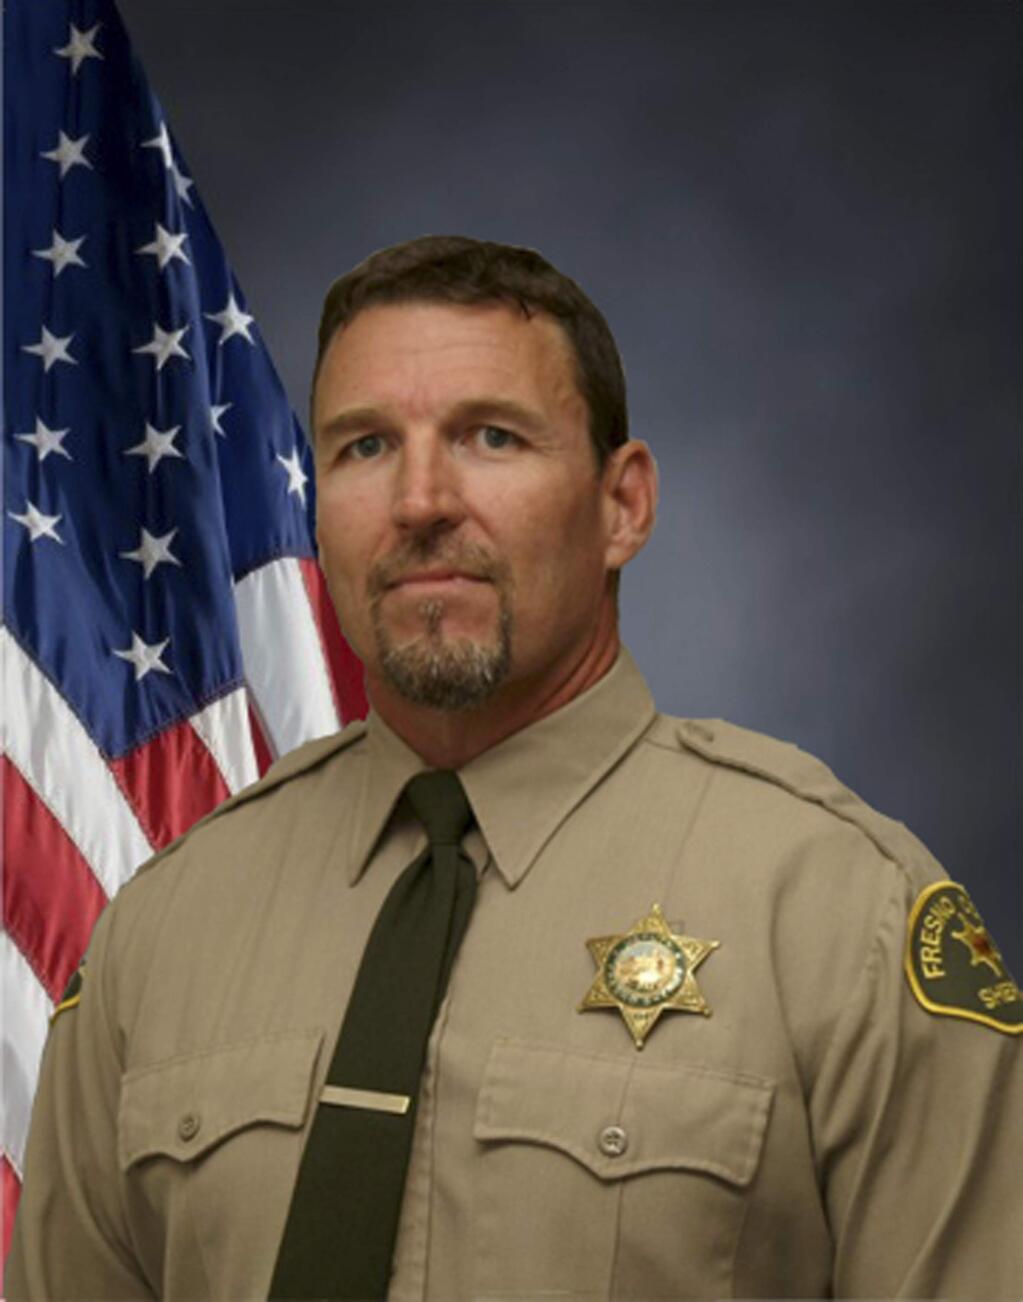 In this undated photo released Tuesday, Nov. 1, 2016 by the Fresno County Sheriff's Office, is Deputy Sergeant Rod Lucas. the 20-year veteran was killed by a bullet in the chest from a colleague's gun in what officials said appeared to be 'a tragic accidental shooting.' Fresno Sheriff Margaret Mims said that Lucas was having a conversation with a detective about how to carry their backup weapons when the shot was fired that killed him on Monday, Oct. 31, 2016. The incident occurred at a sheriff's office near the Fresno Yosemite International Airport in Fresno, Calif. (Fresno County Sheriff's Office via AP)